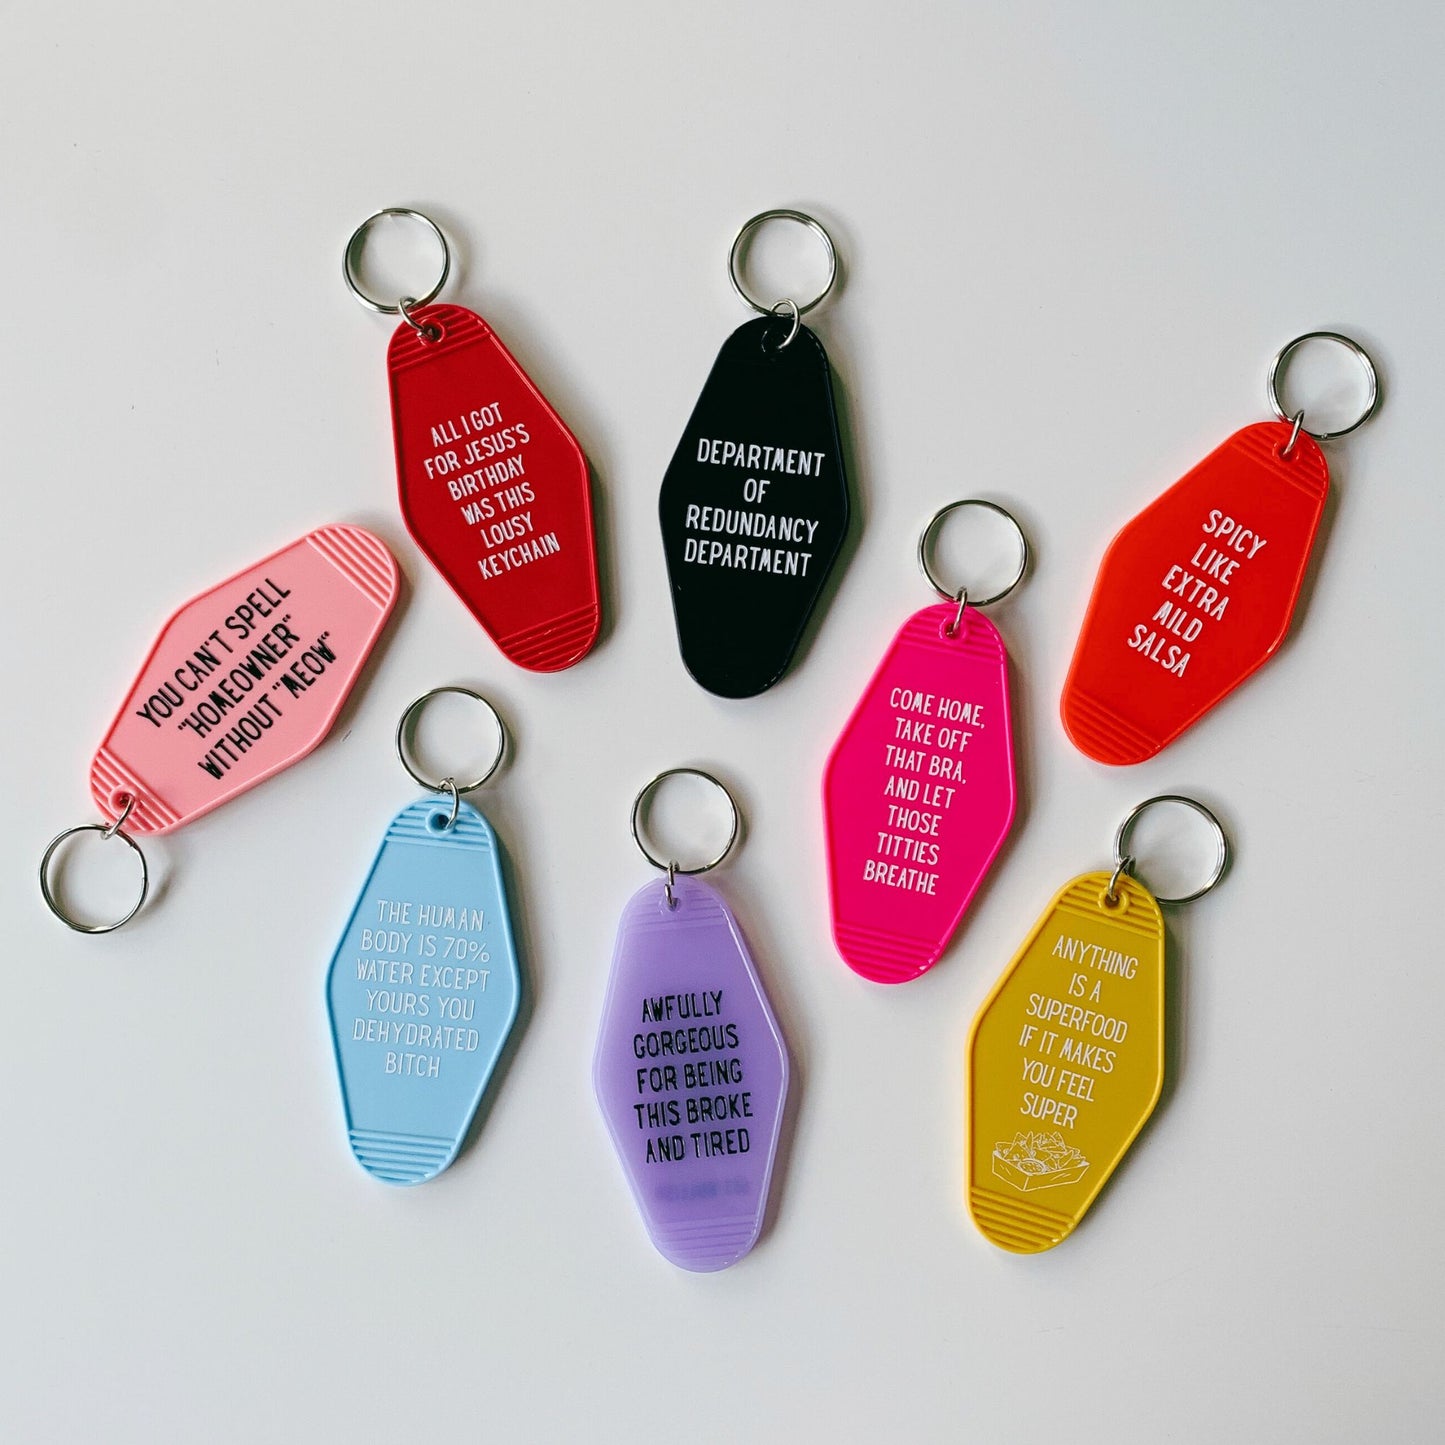 The Human Body is 70% Water Except Yours You Dehydrated B*tch Motel Style Keychain in Blue